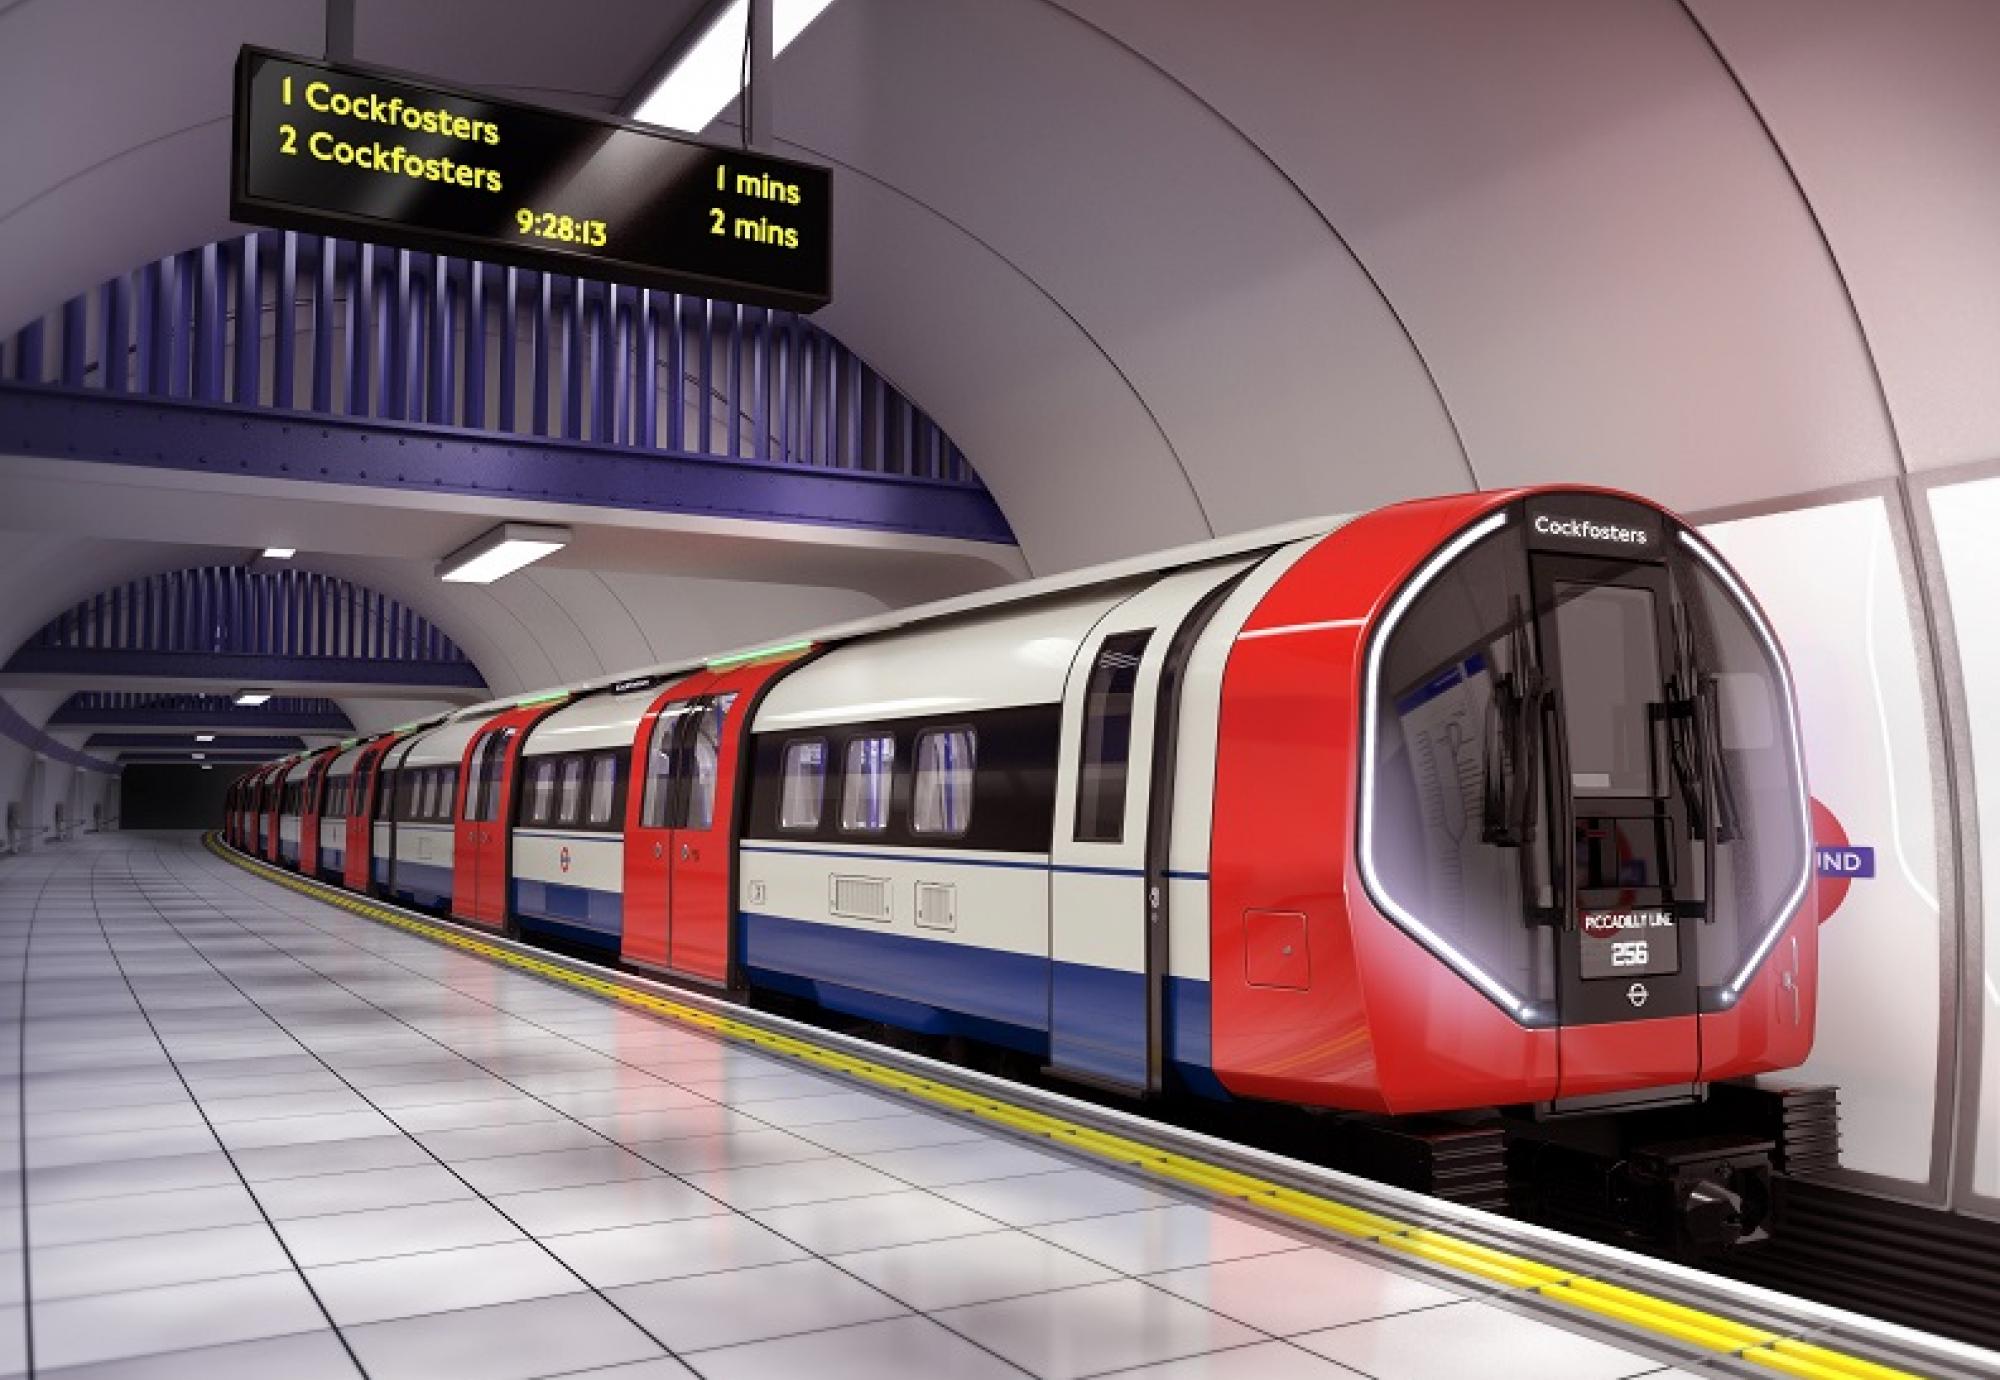 New Piccadilly Line tube train design